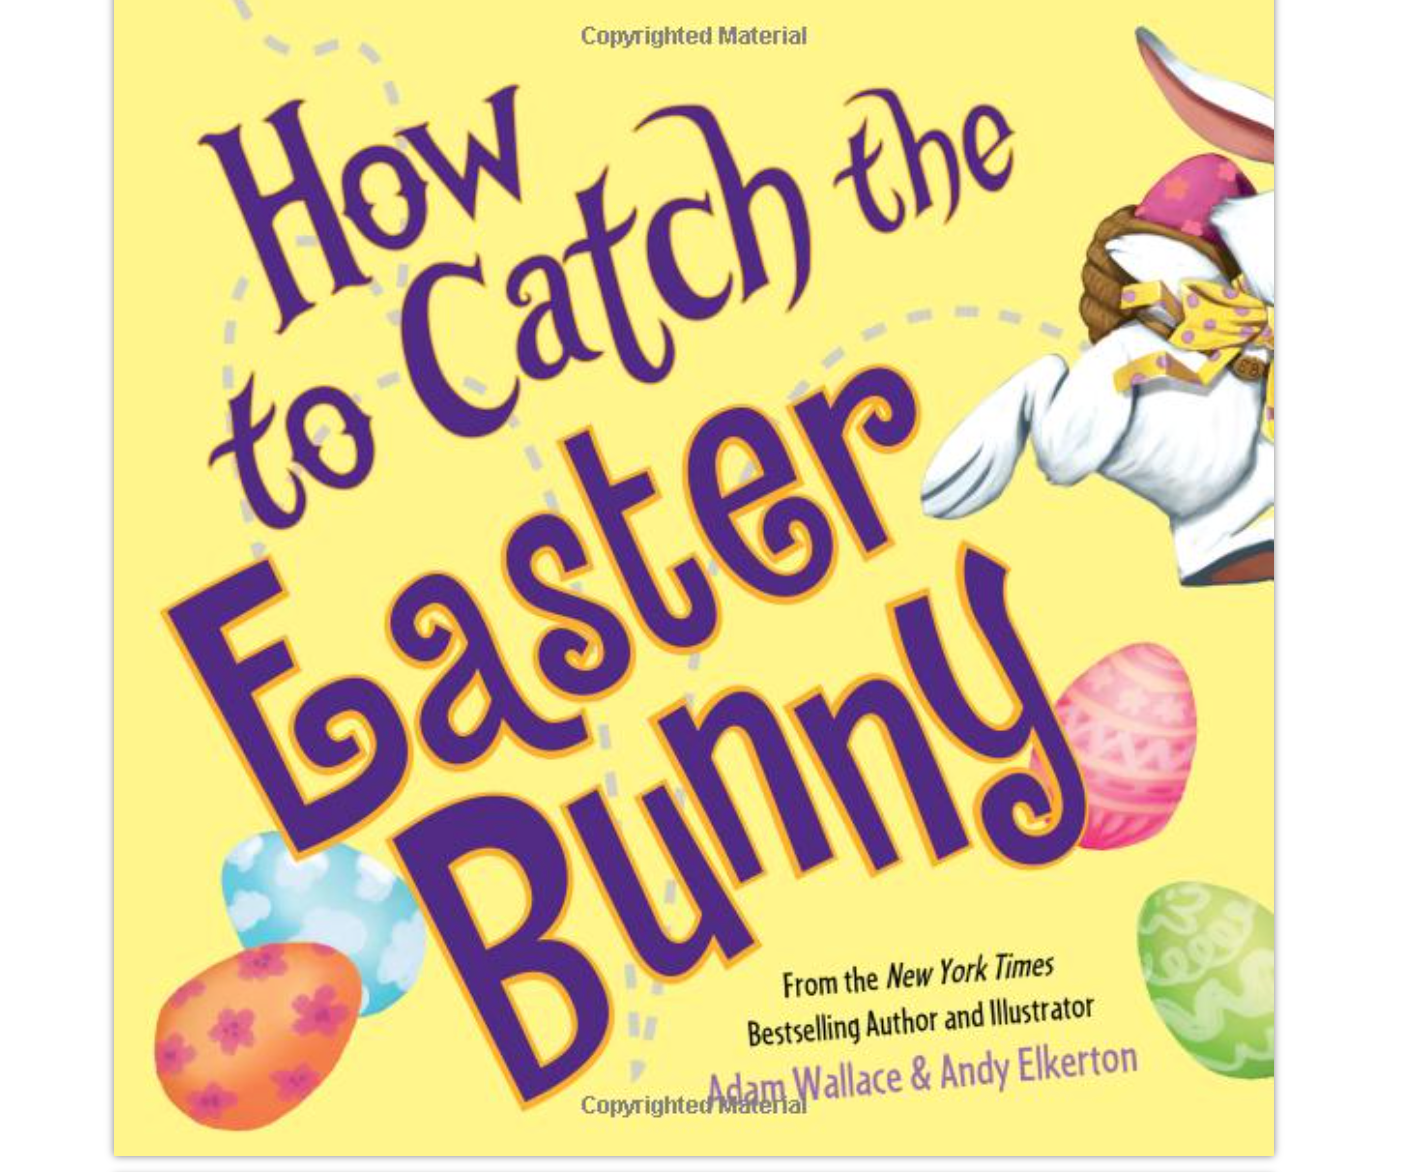 How to Catch the Easter Bunny Hardcover